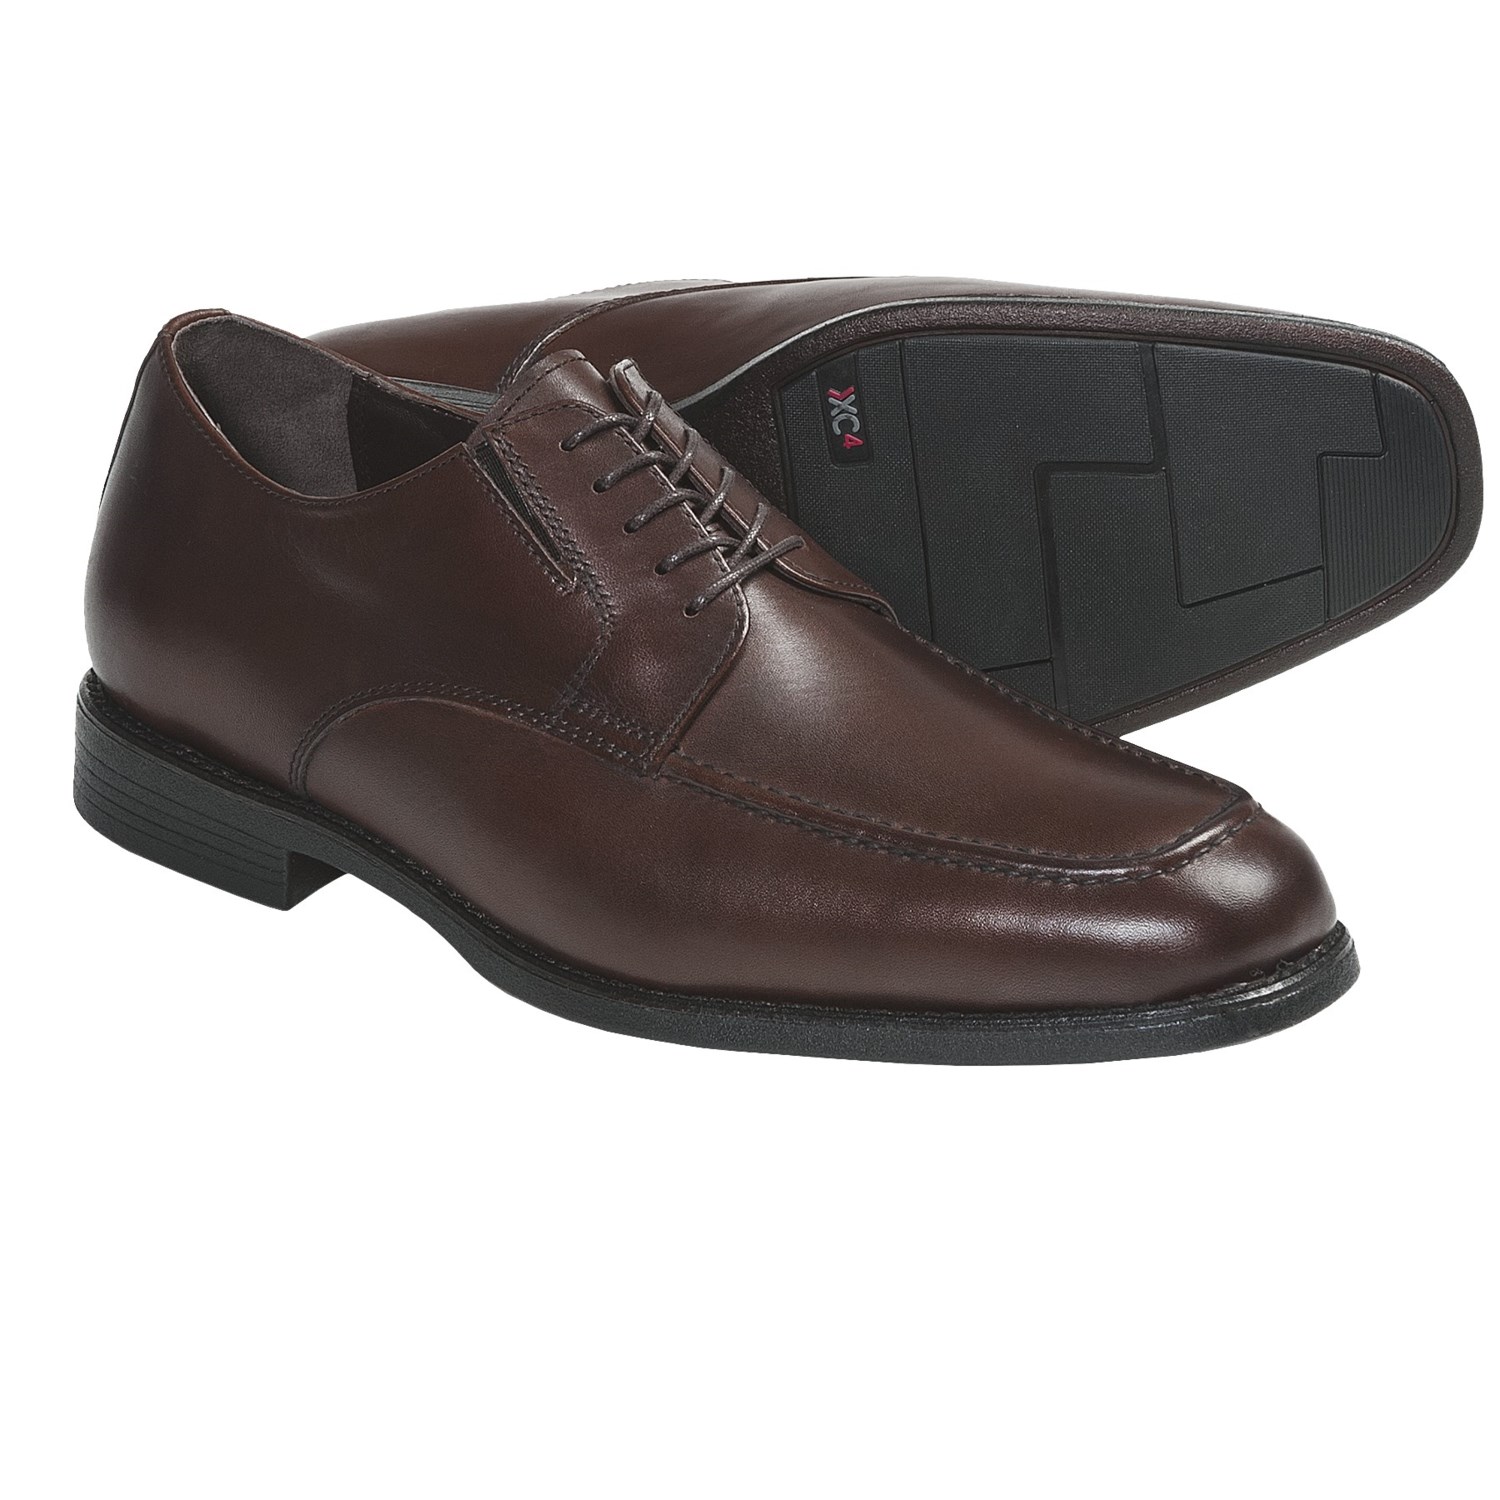 johnston-and-murphy-suffolk-shoes-waterproof-moc-toe-for-men-in ...